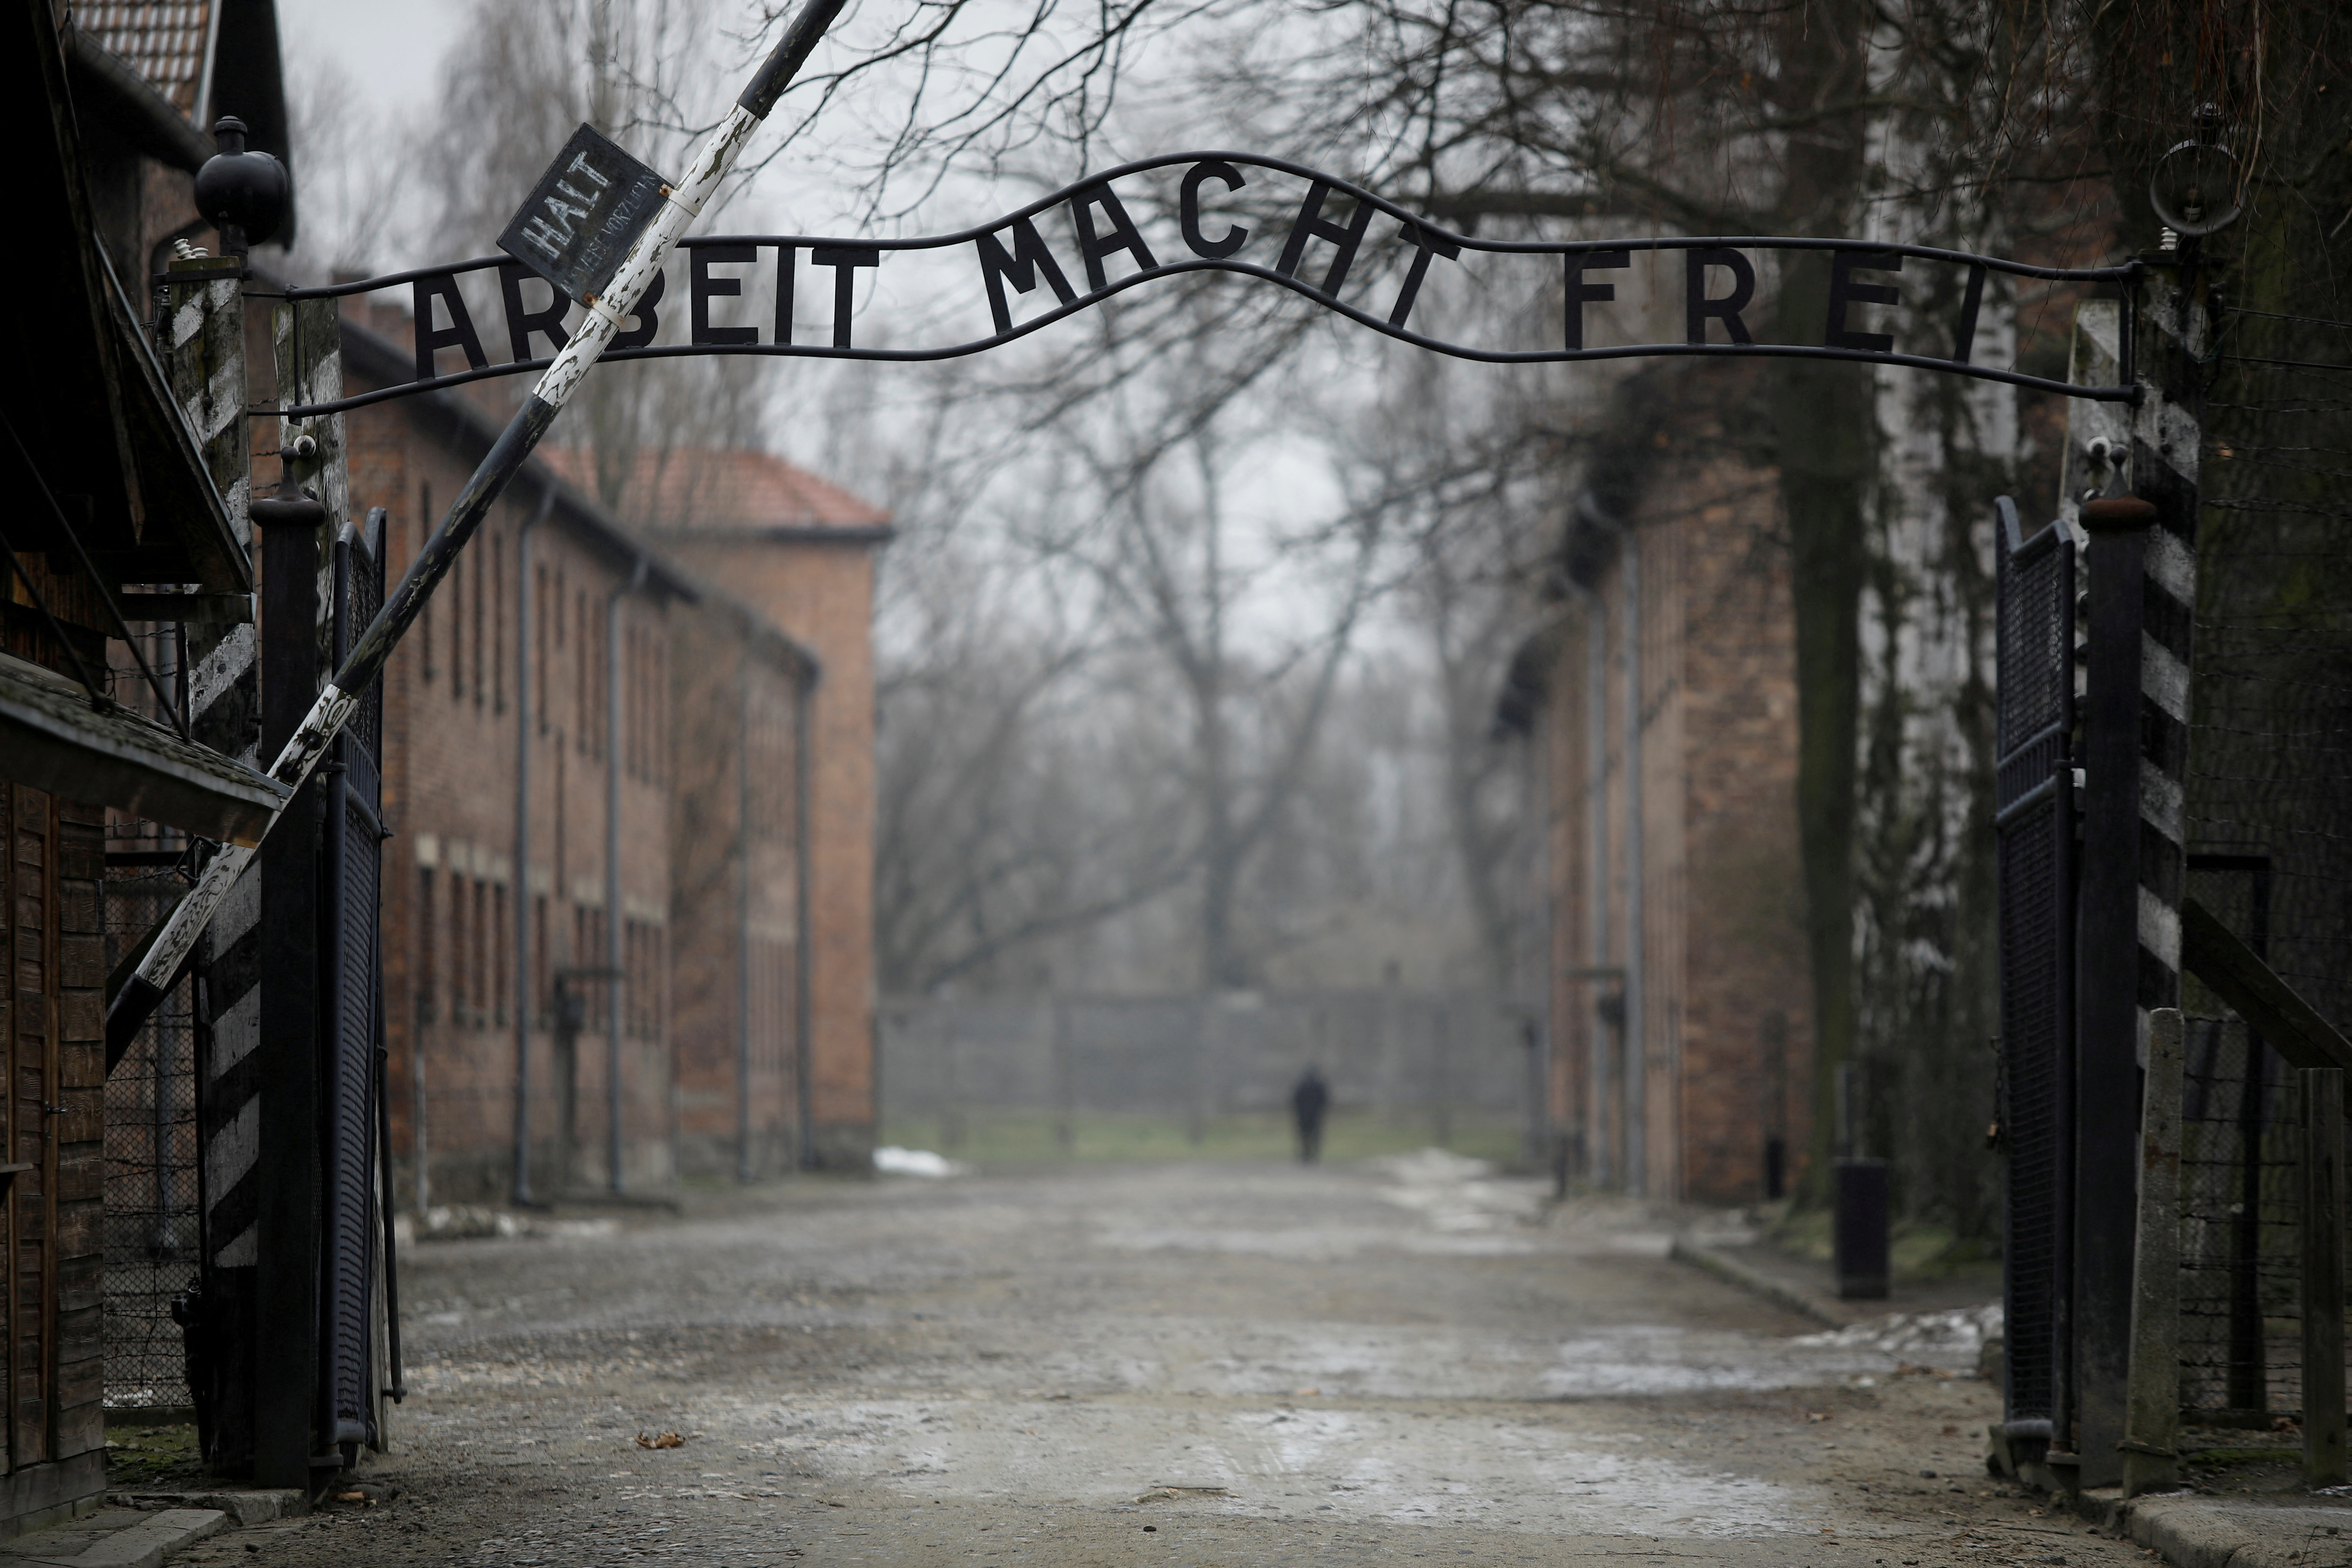 76th Auschwitz liberation commemoration held virtually amidst COVID pandemic